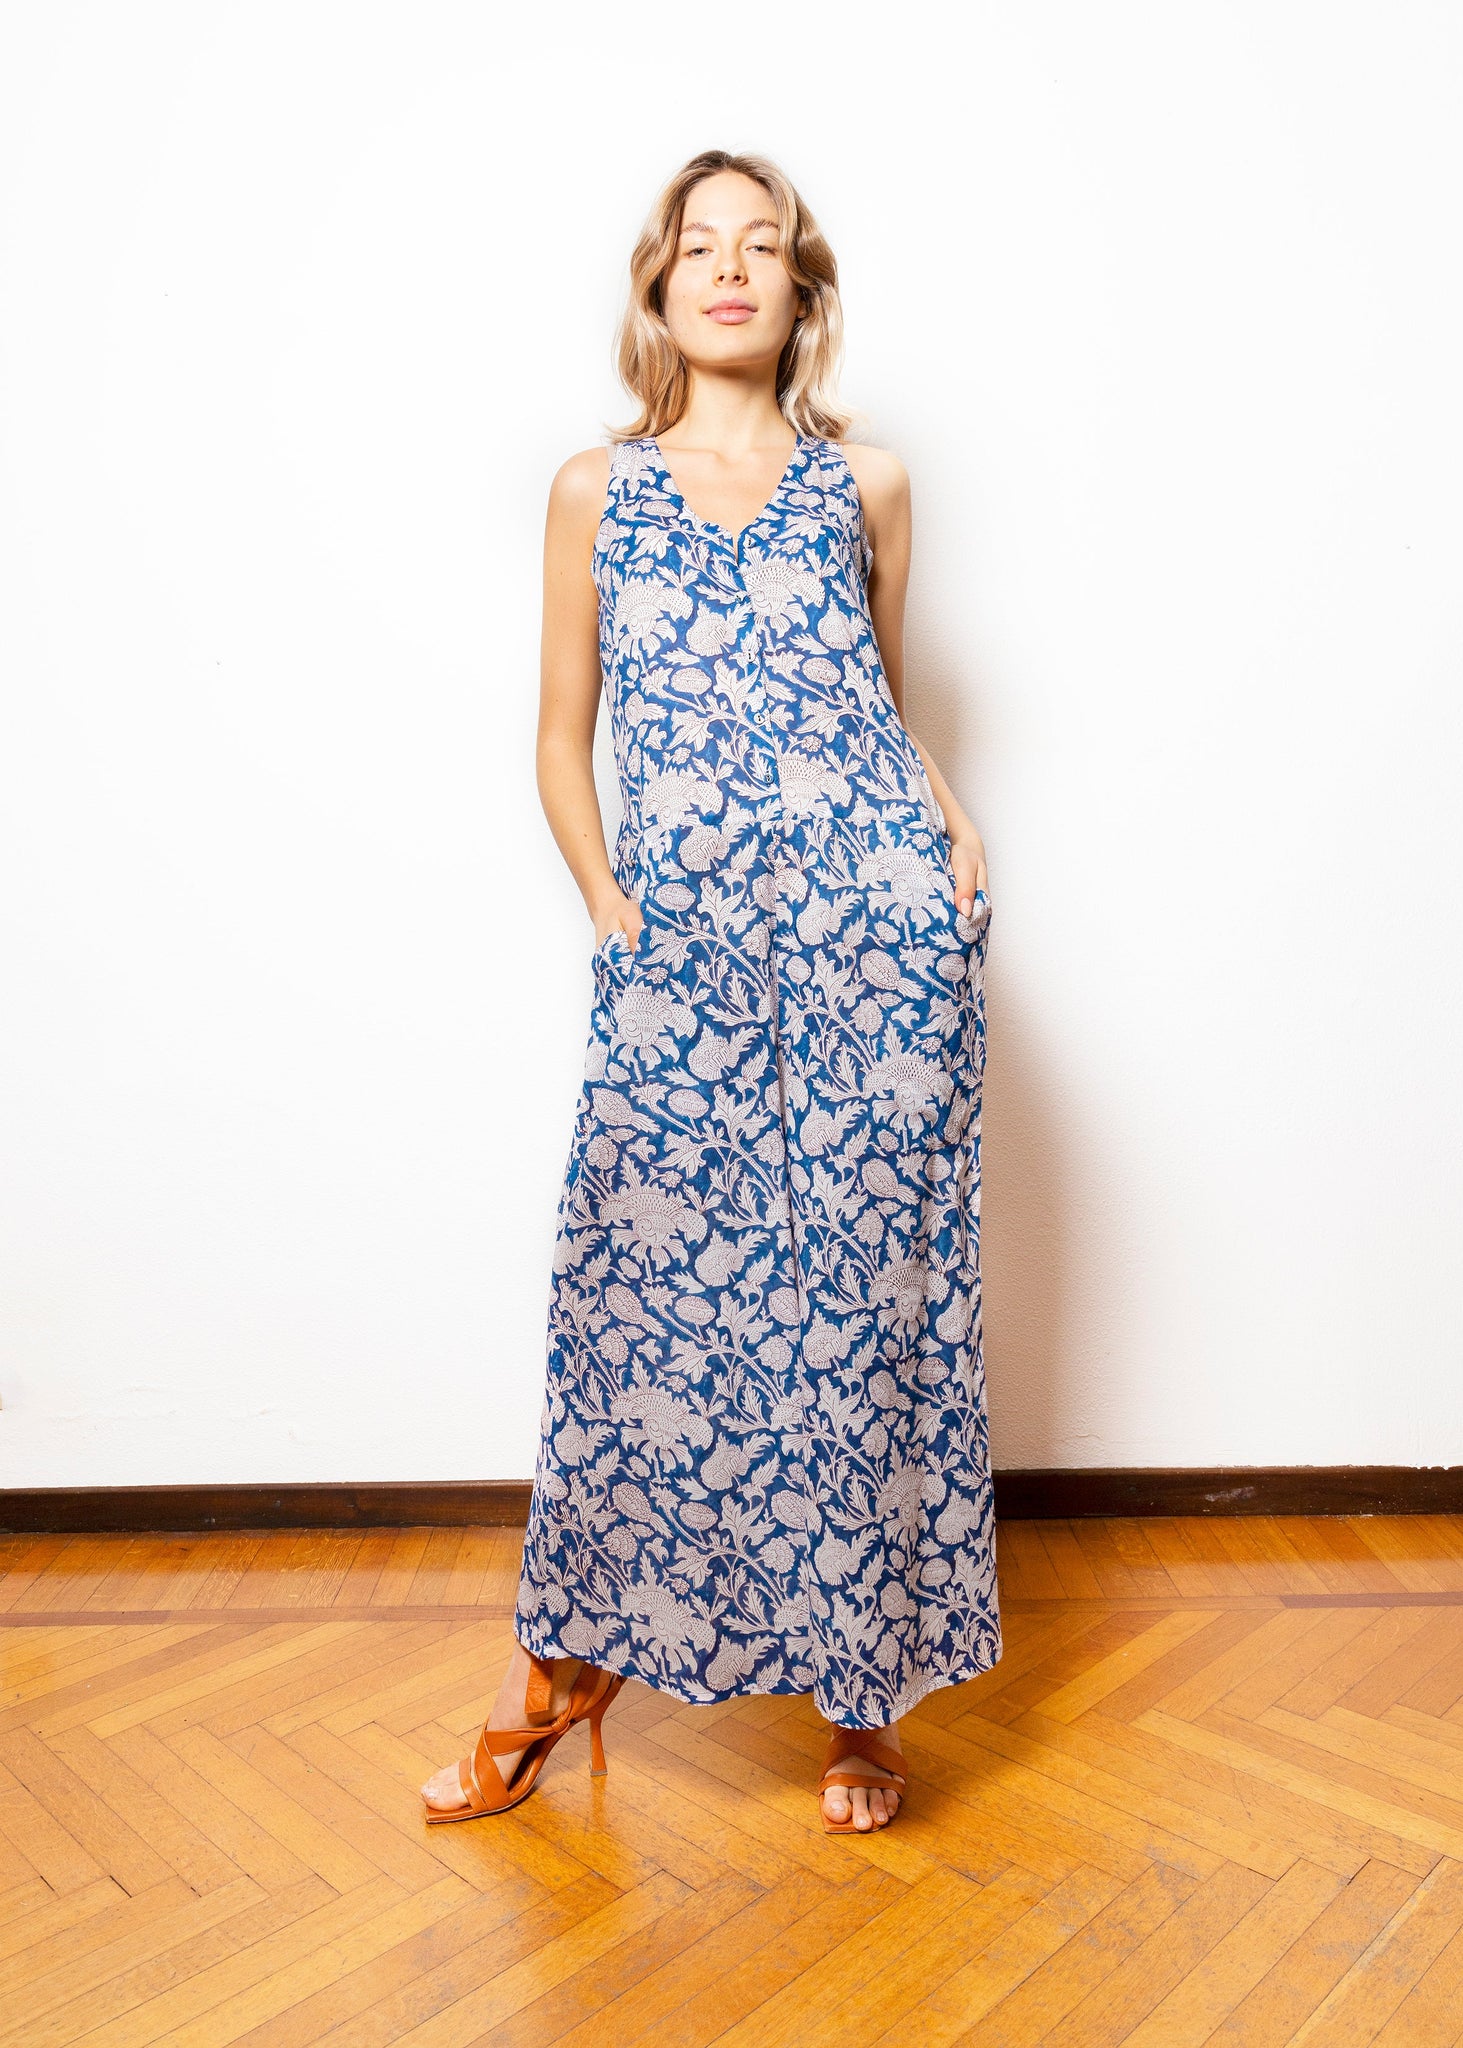 Blue and white sleeveless cotton jumpsuit dress with floral print - NAKSH007